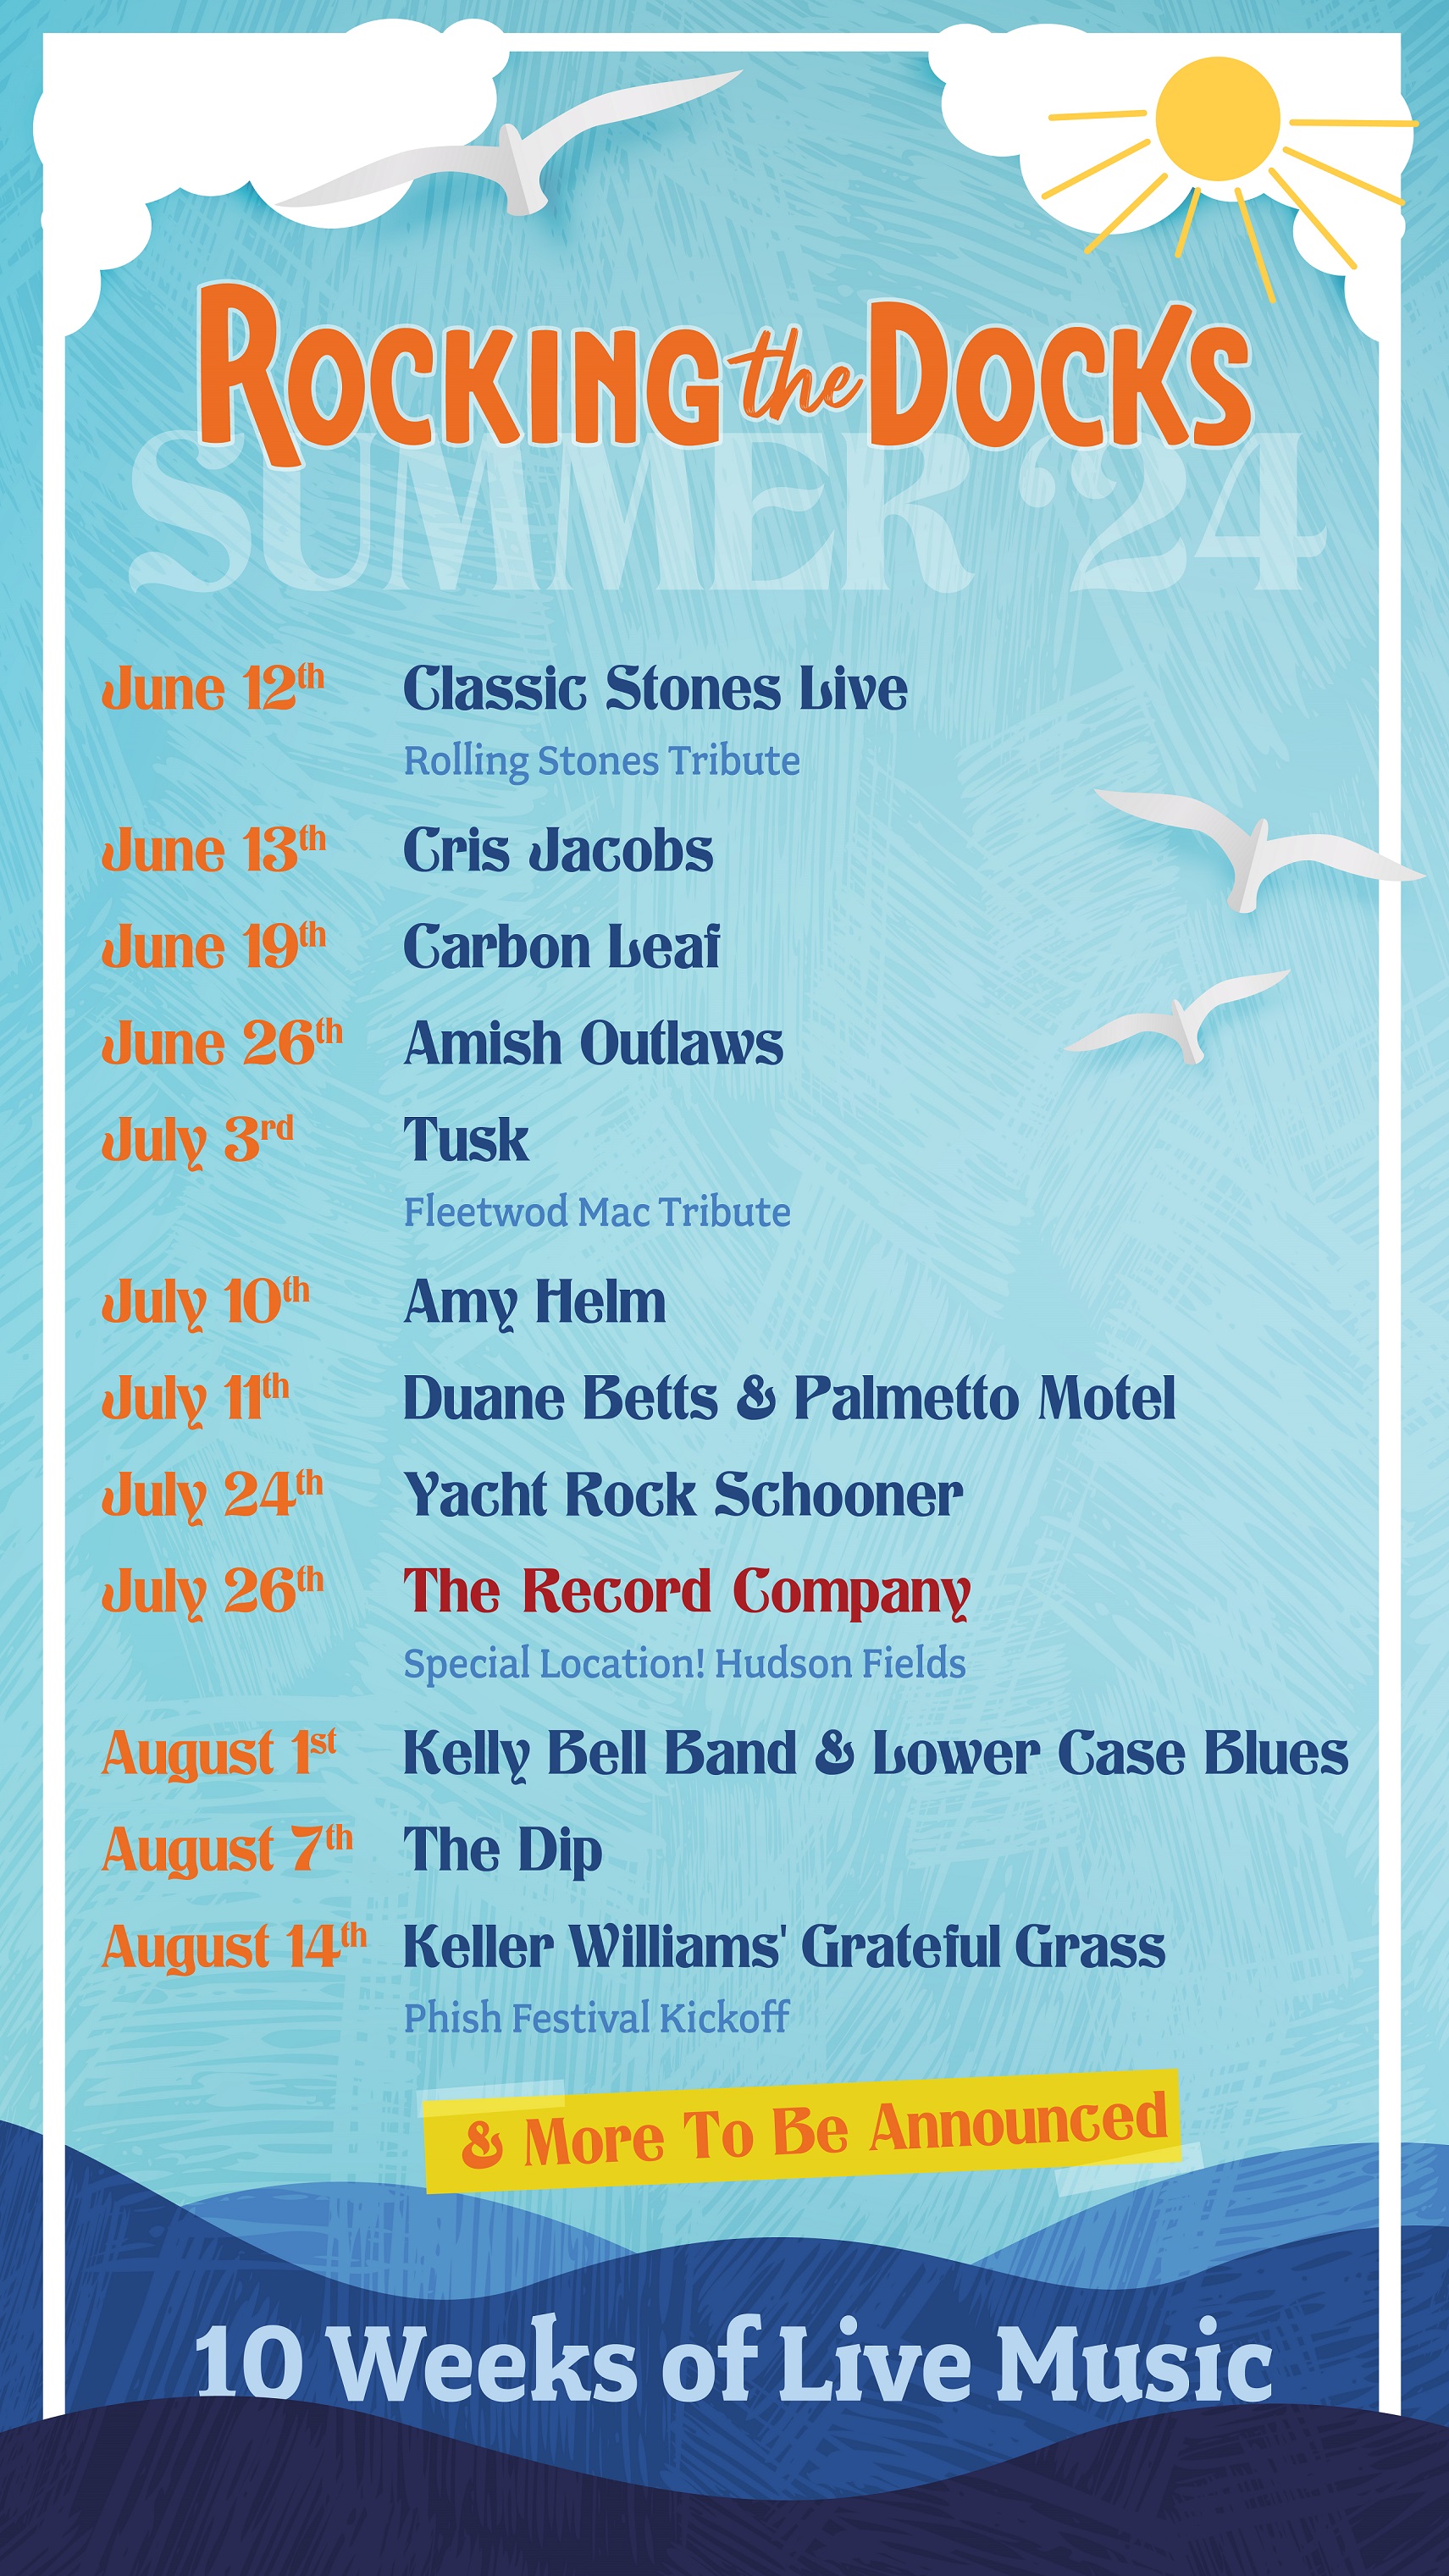 Lewes Concert Series is Back with a Spectacular Lineup and Stunning Sunsets!